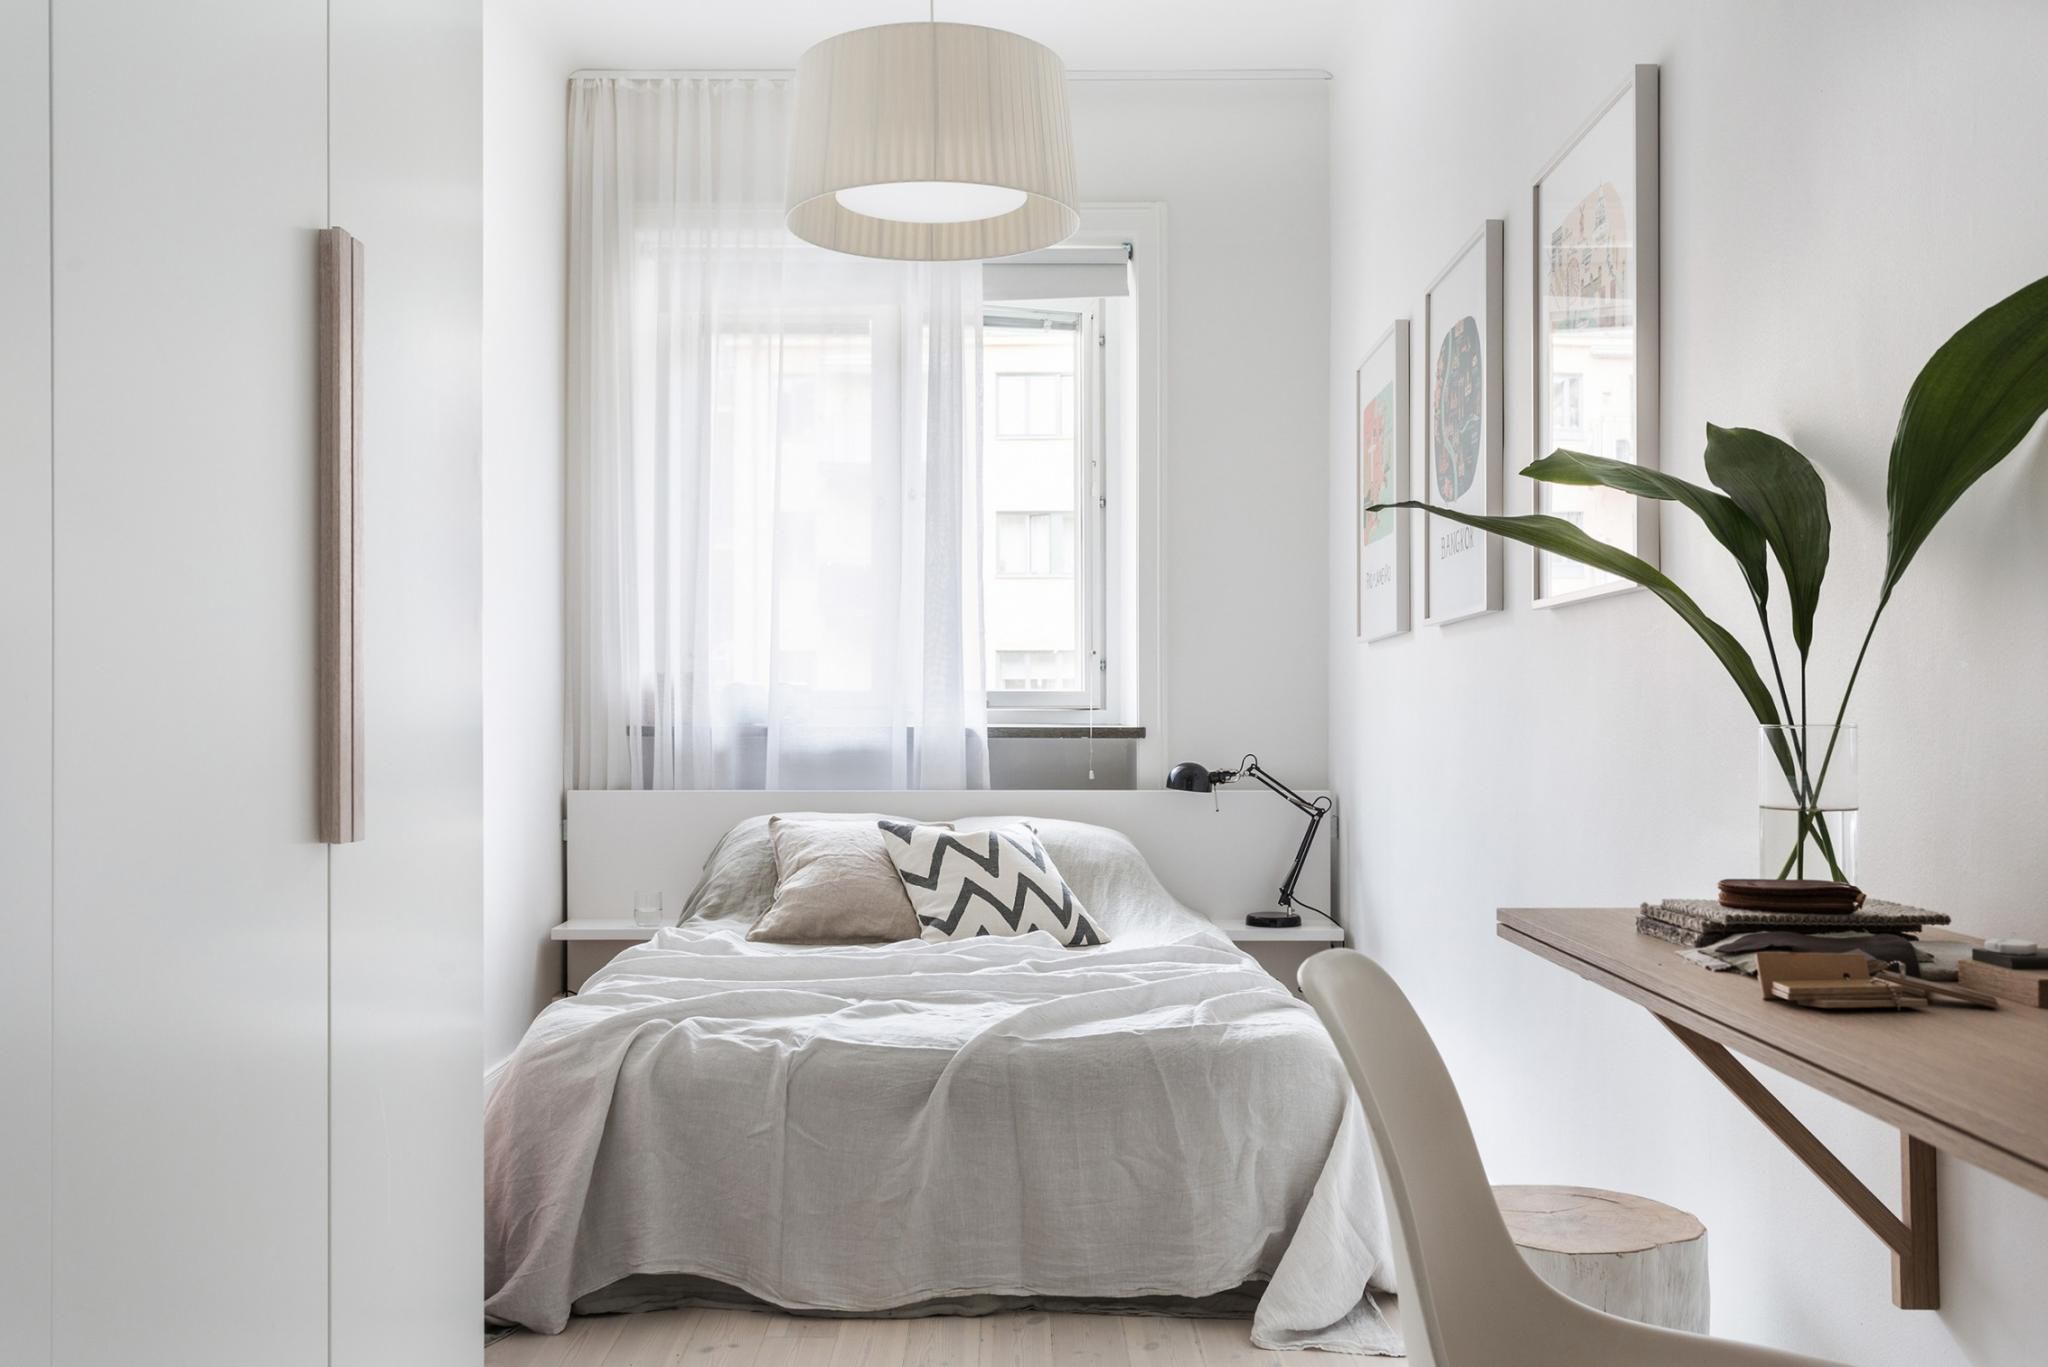 19 Pieces of Chic Small Bedroom Furniture (All Under $500)